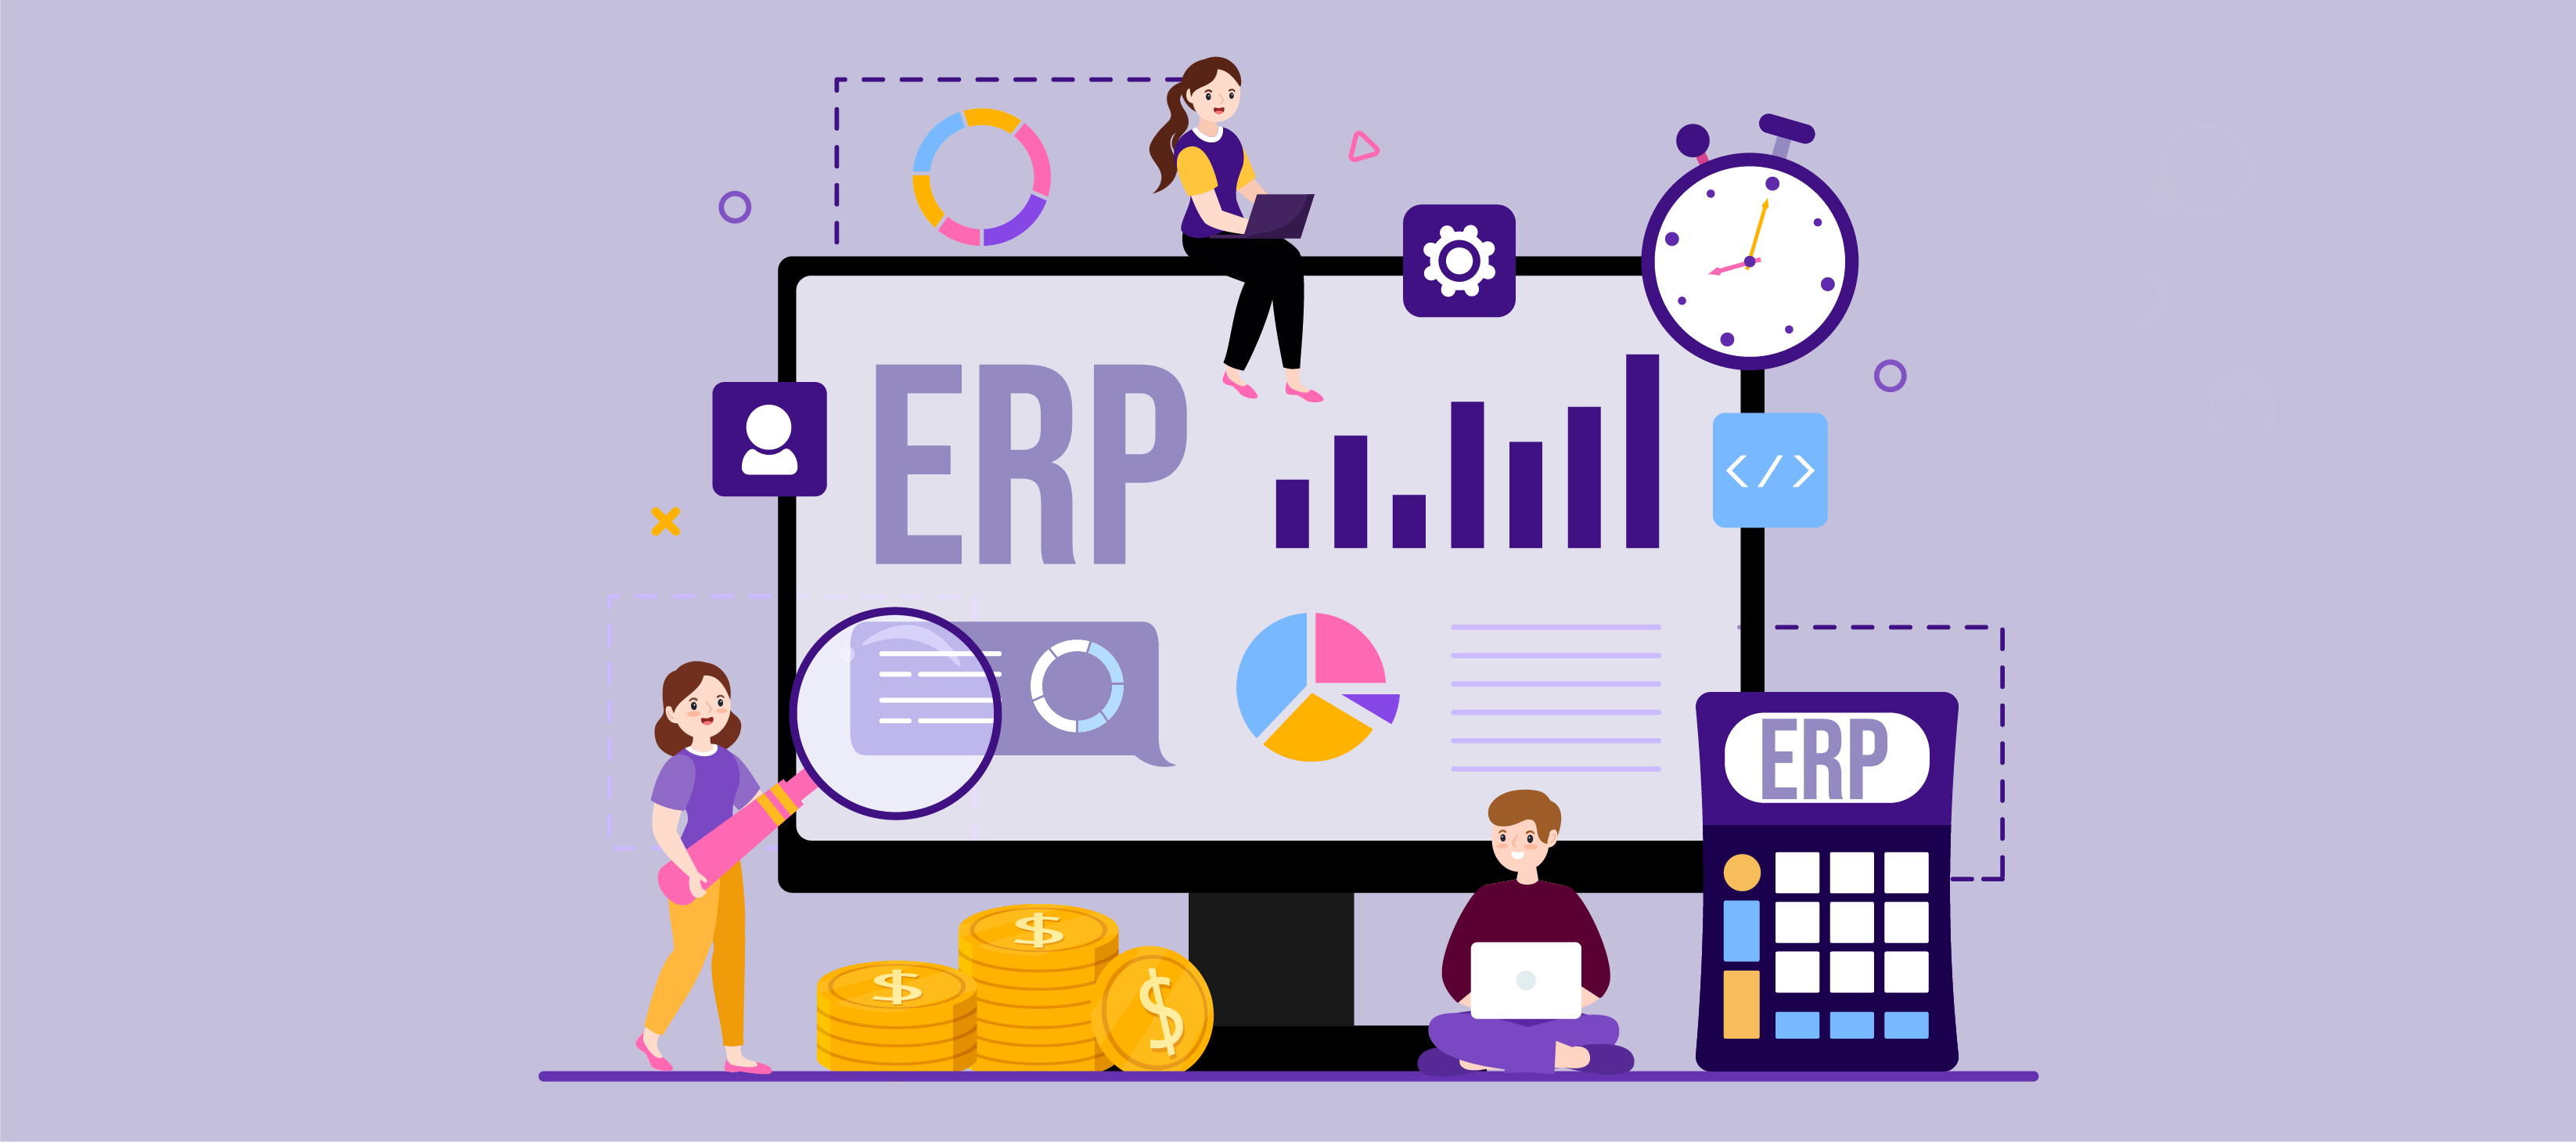 Top 10 Examples of ERP Applications in 2023.